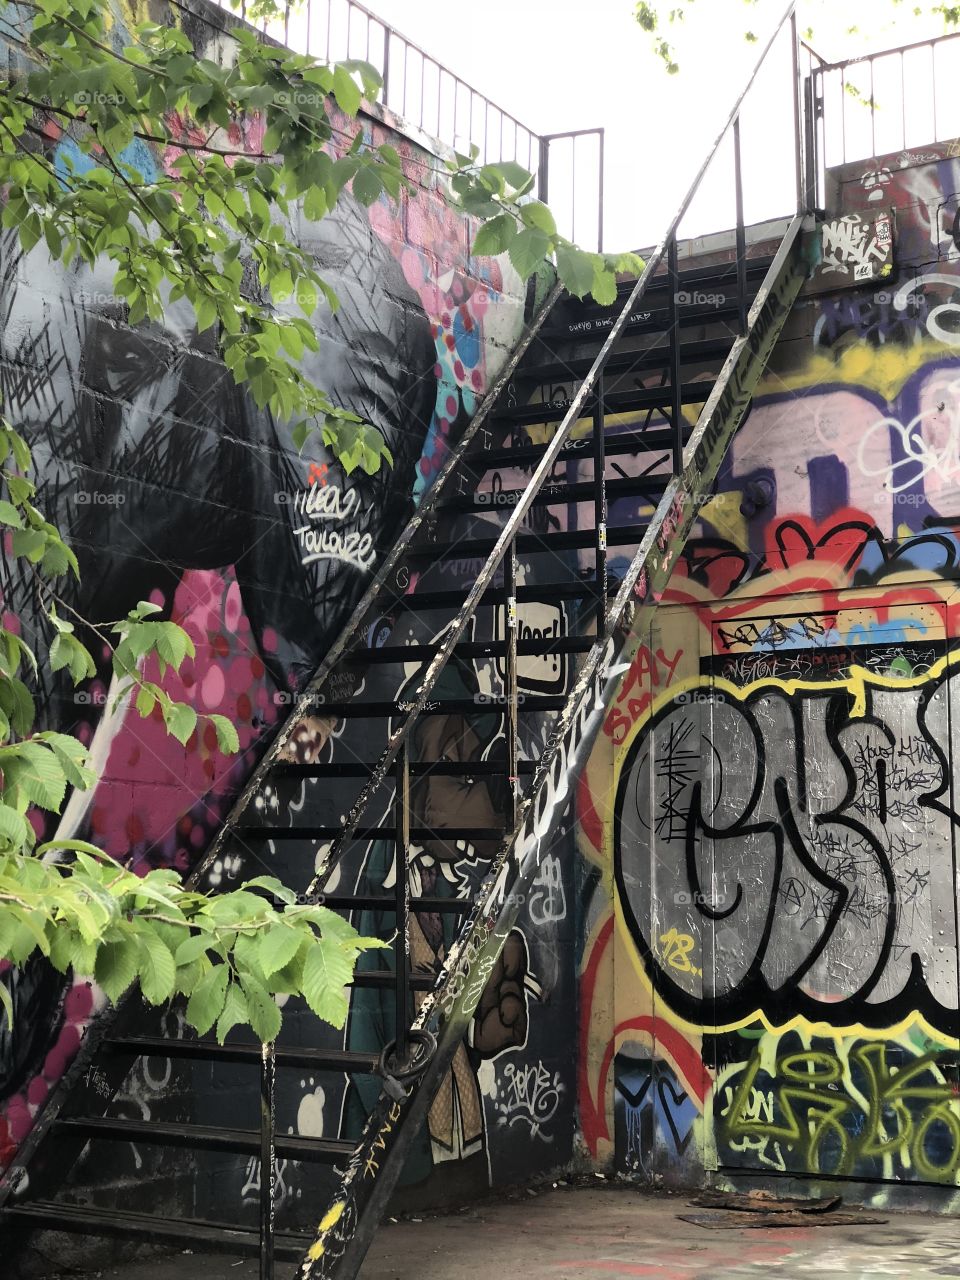 Graffiti alley stairs in Toronto, Canada, a street with many colorful graphics on the walls